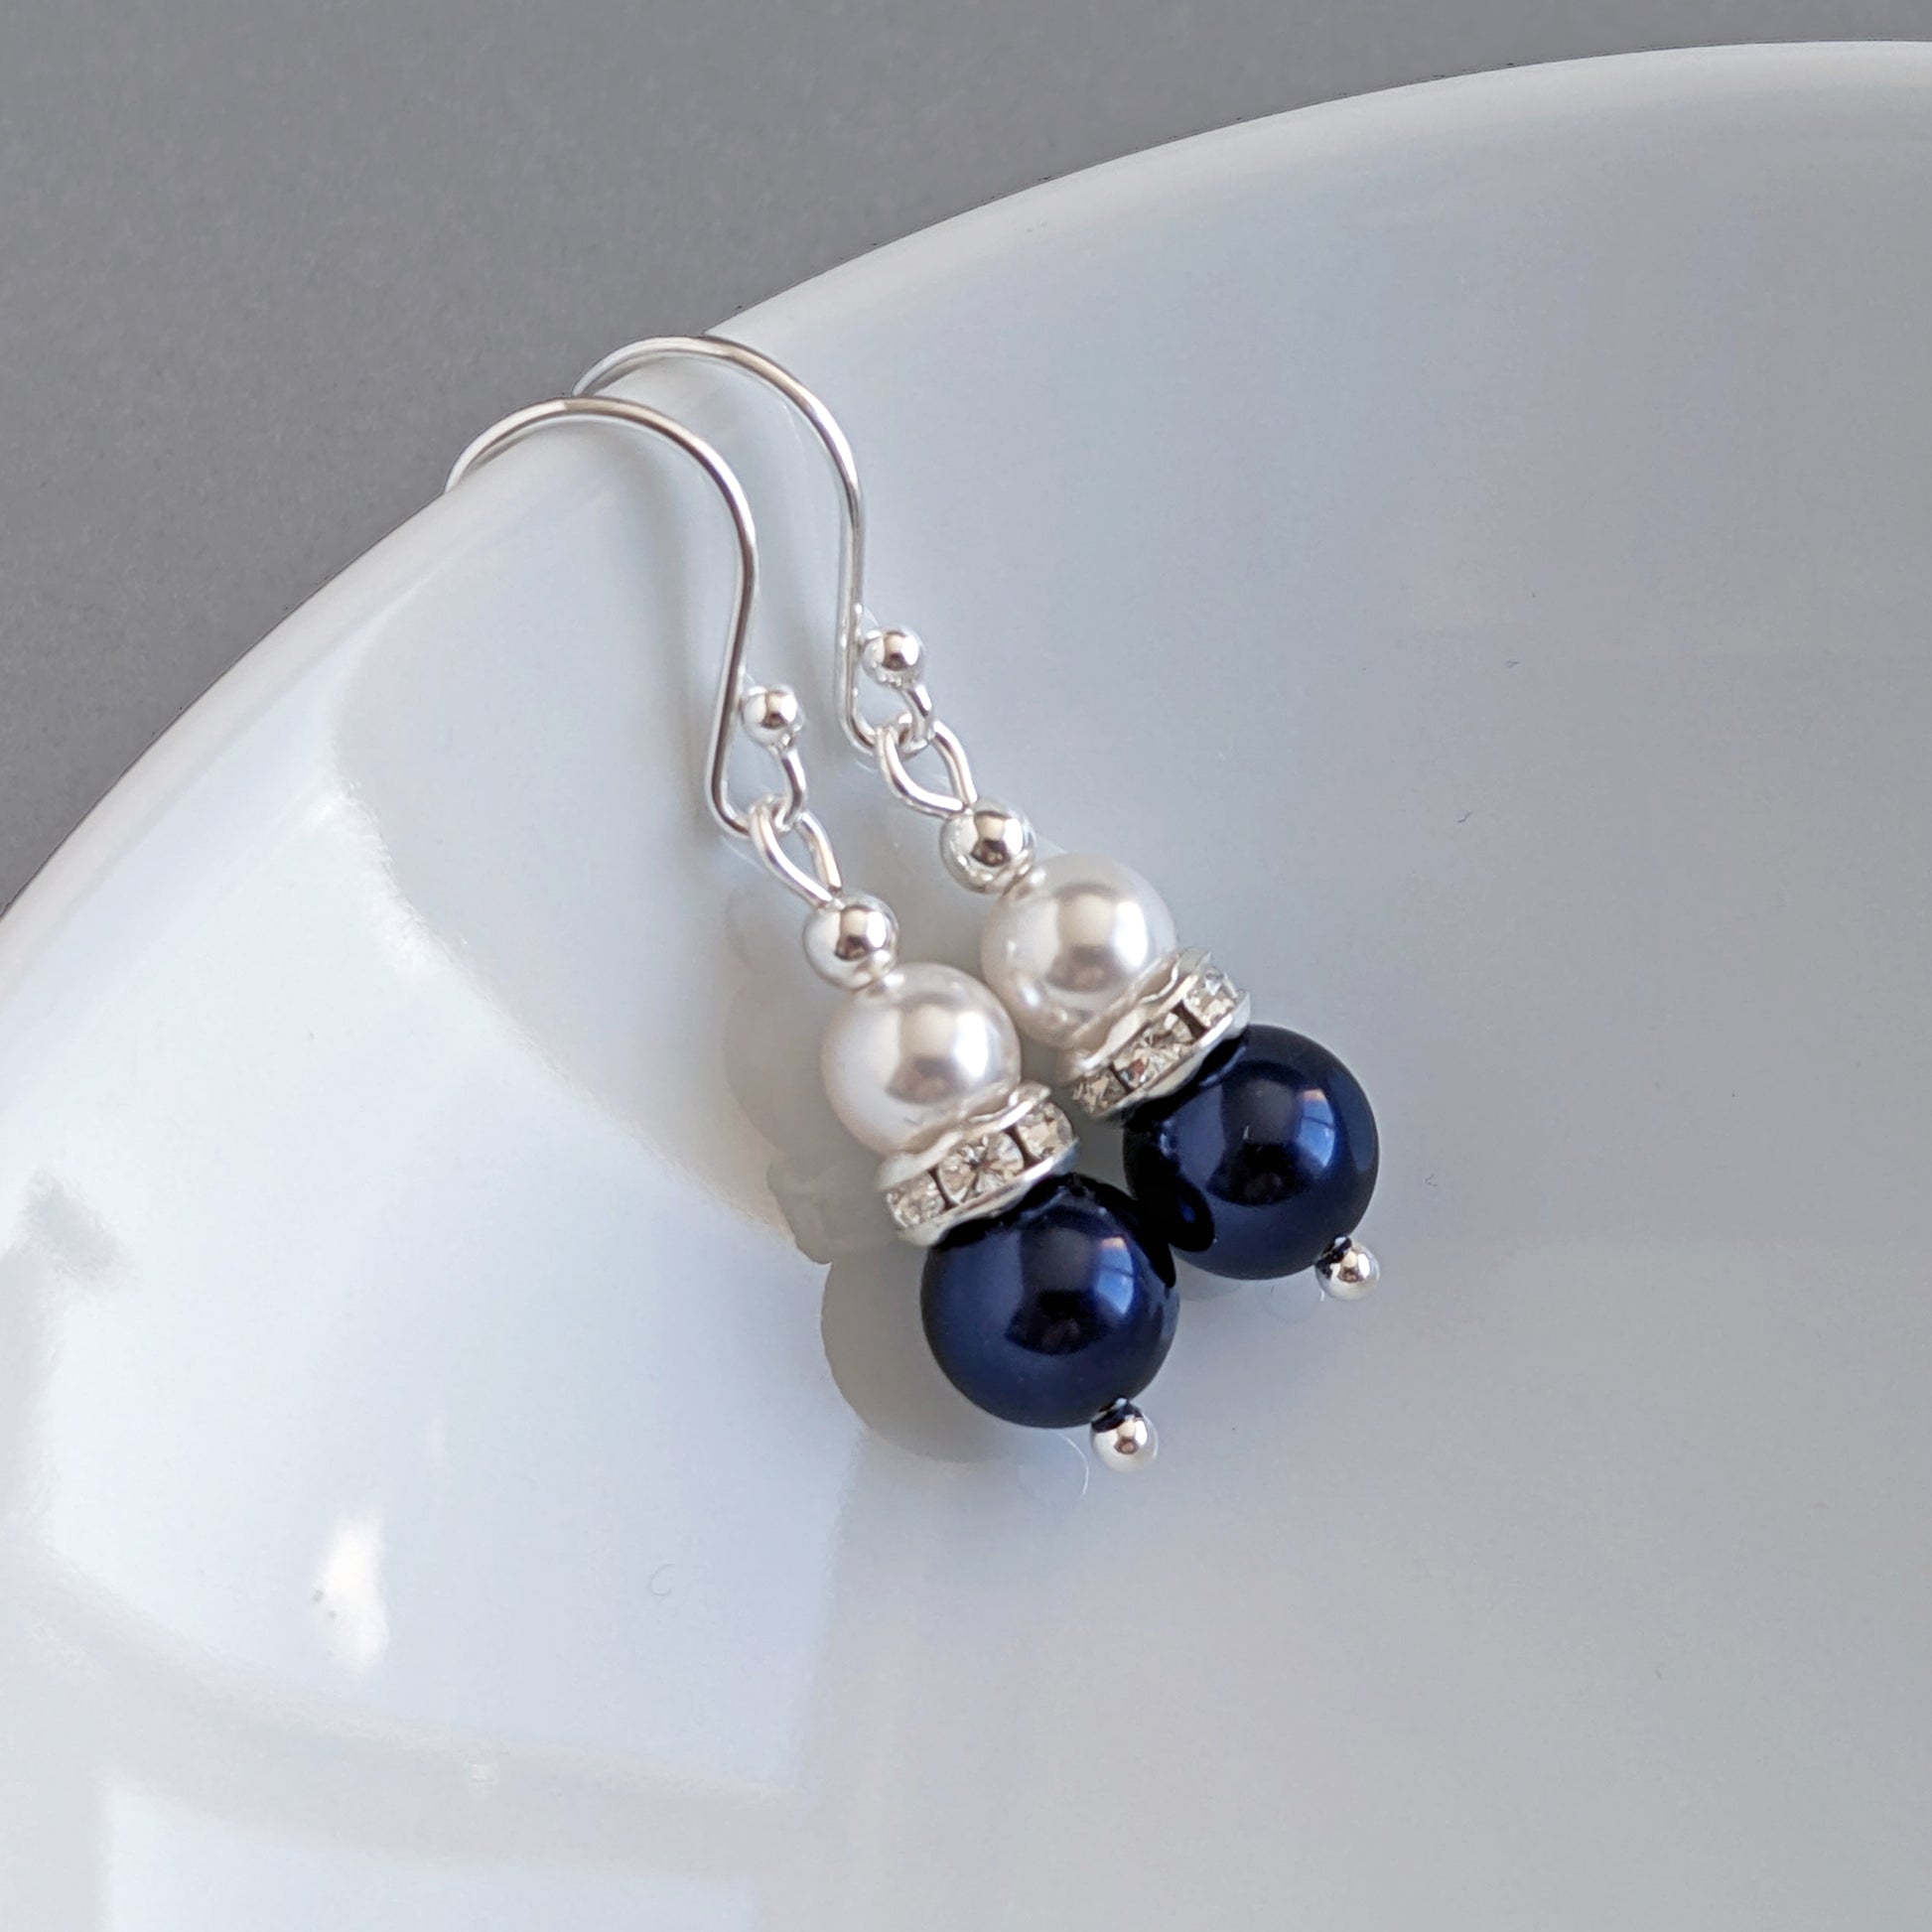 Navy and white pearl earrings